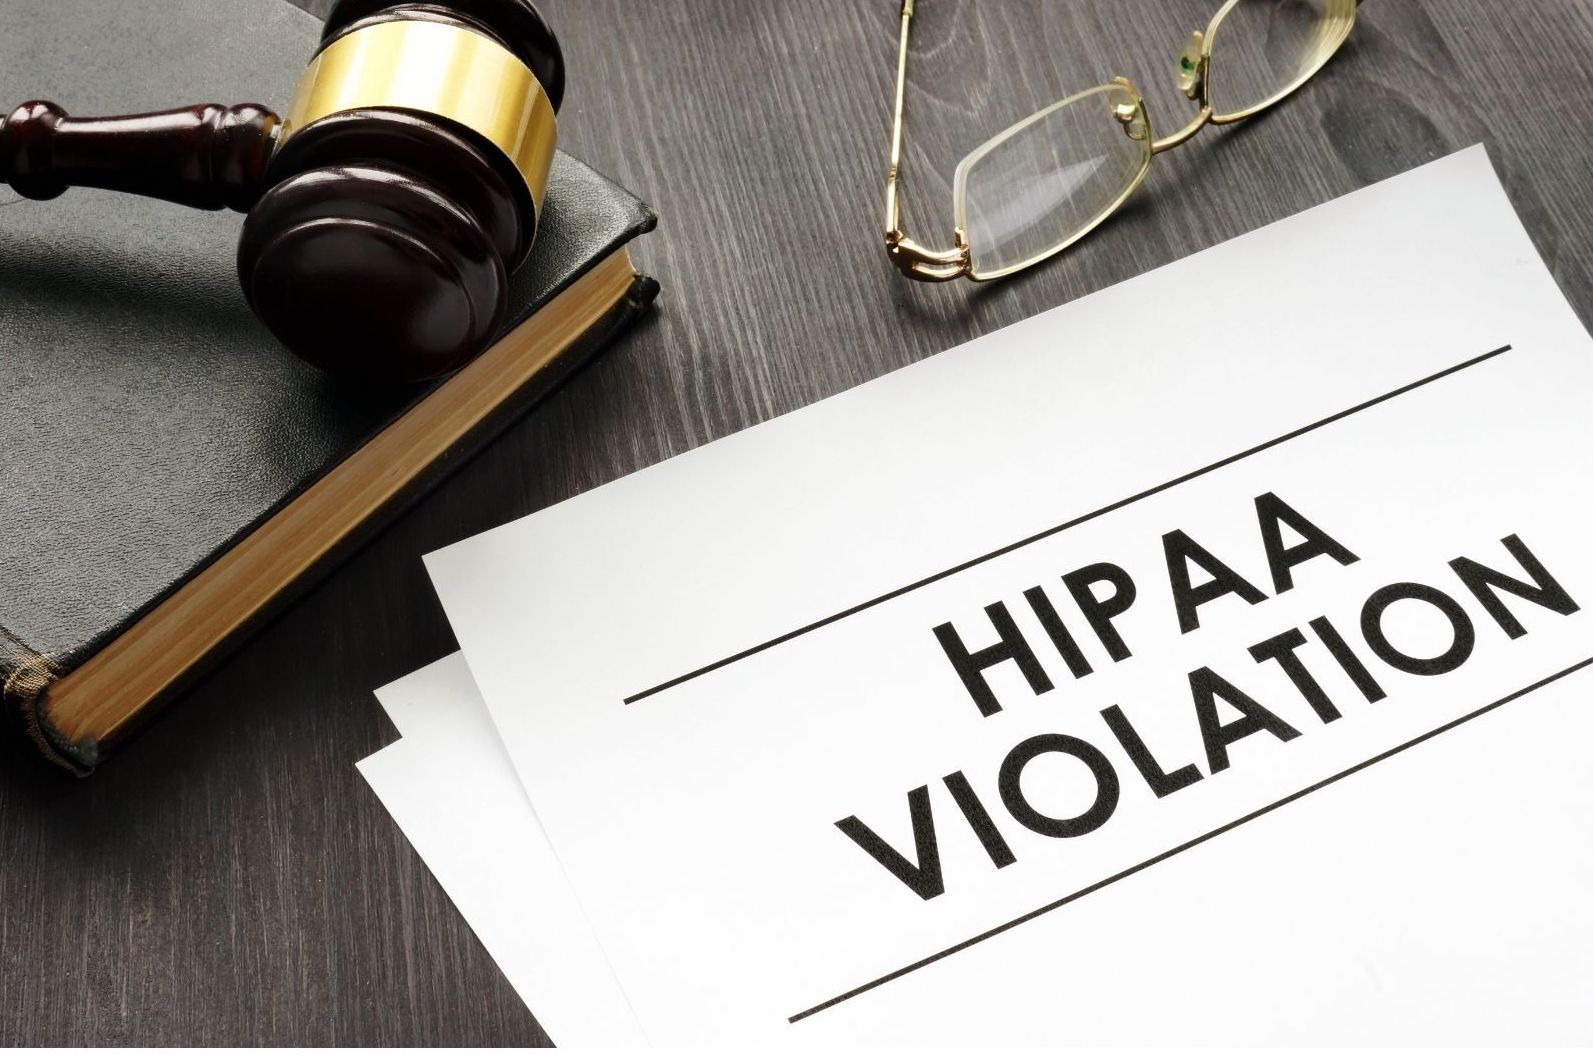 What happens when a HIPAA complaint is filed against you